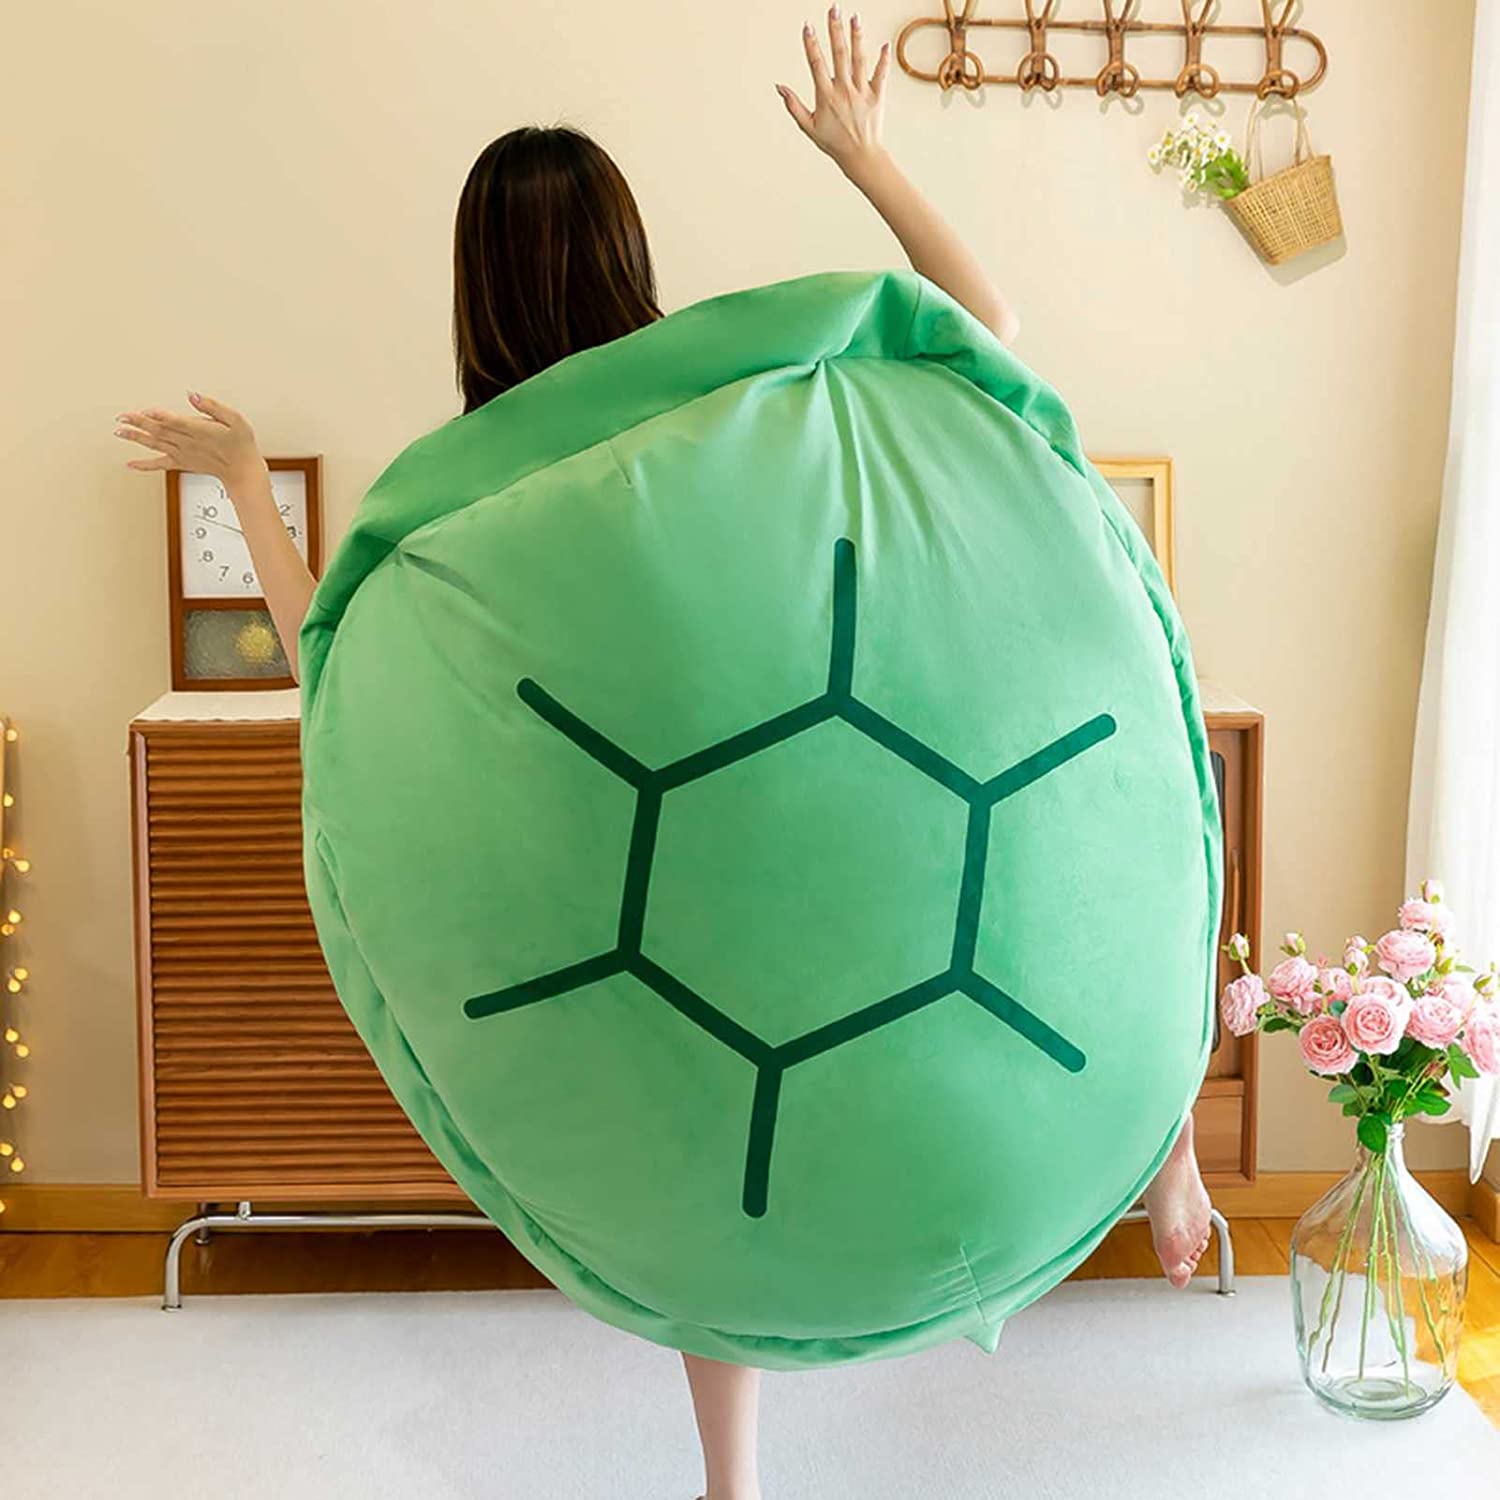 Wearable Turtle Shell Pillows - Green